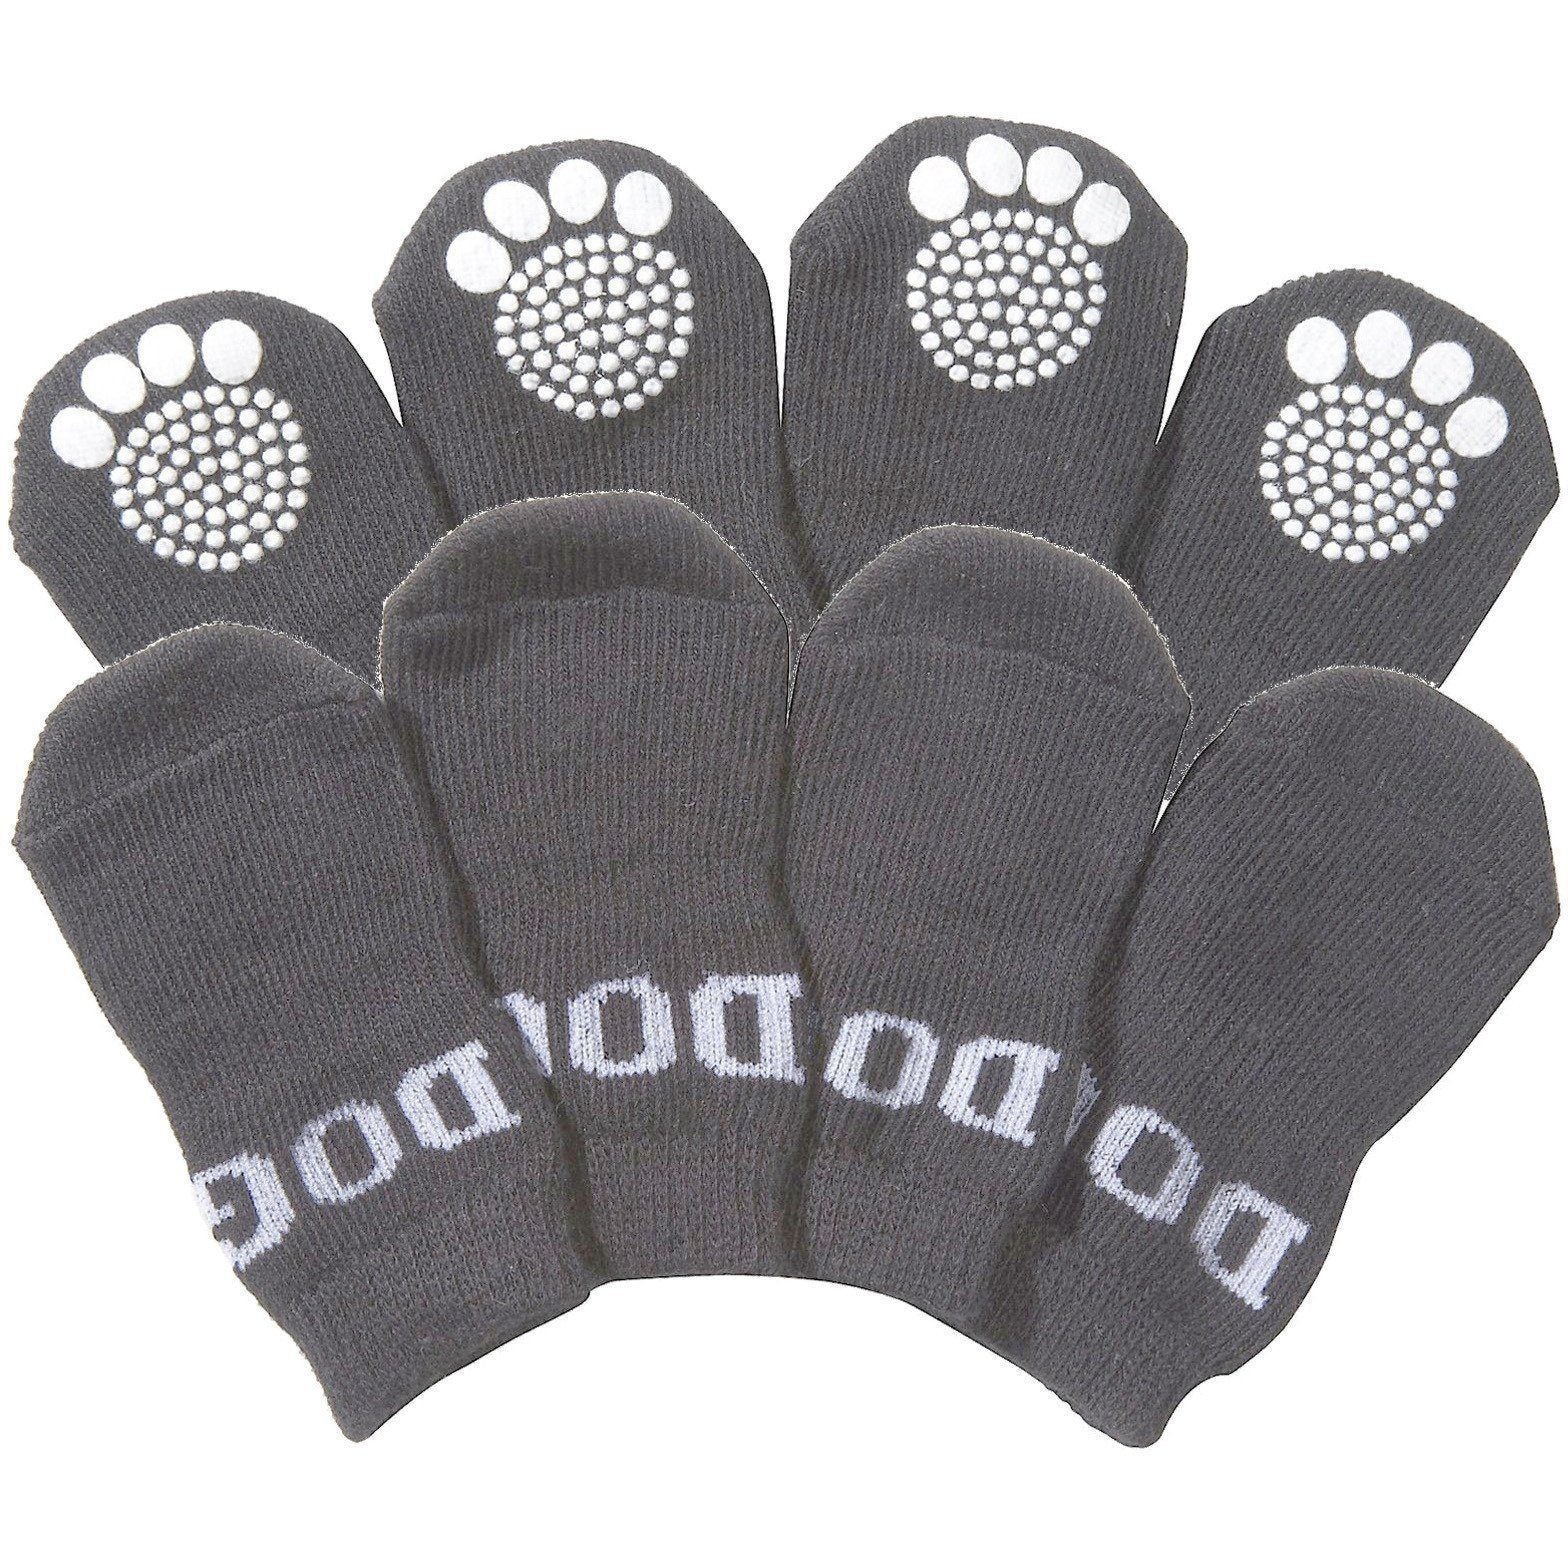 Pet Life ® Anti-Slip Rubberized Gripped Breathable Stretch Pet Dog Socks - Set of 4 Small Grey